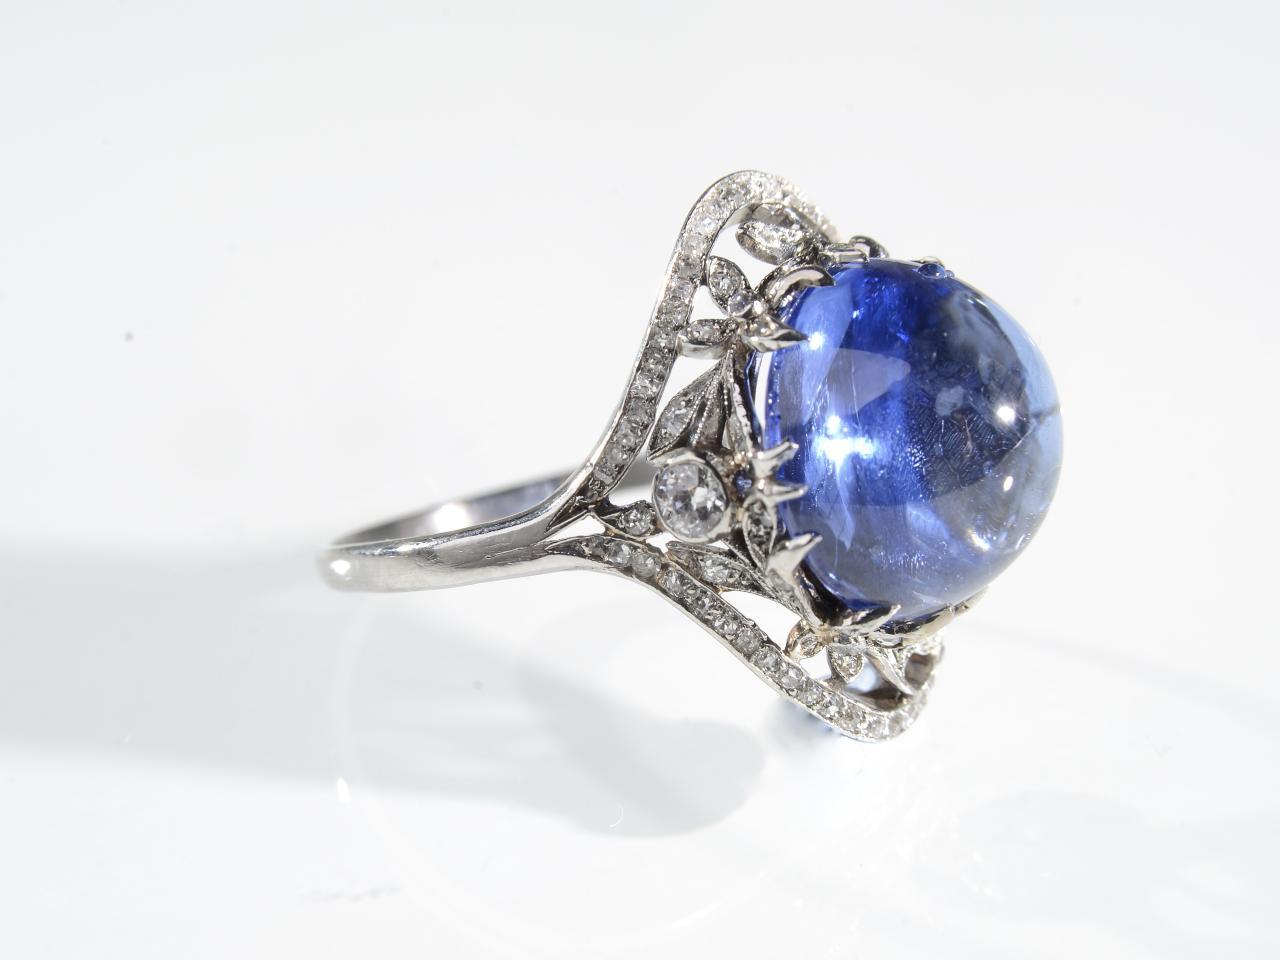 Antique Ceylon sapphire cabochon and diamond ring in platinum, centrally set with a 10.90cts round cabochon Ceylon sapphire, with no indications of heat treatment, in a stylised claw setting, framed by a naturalistic diamond set openwork cluster,